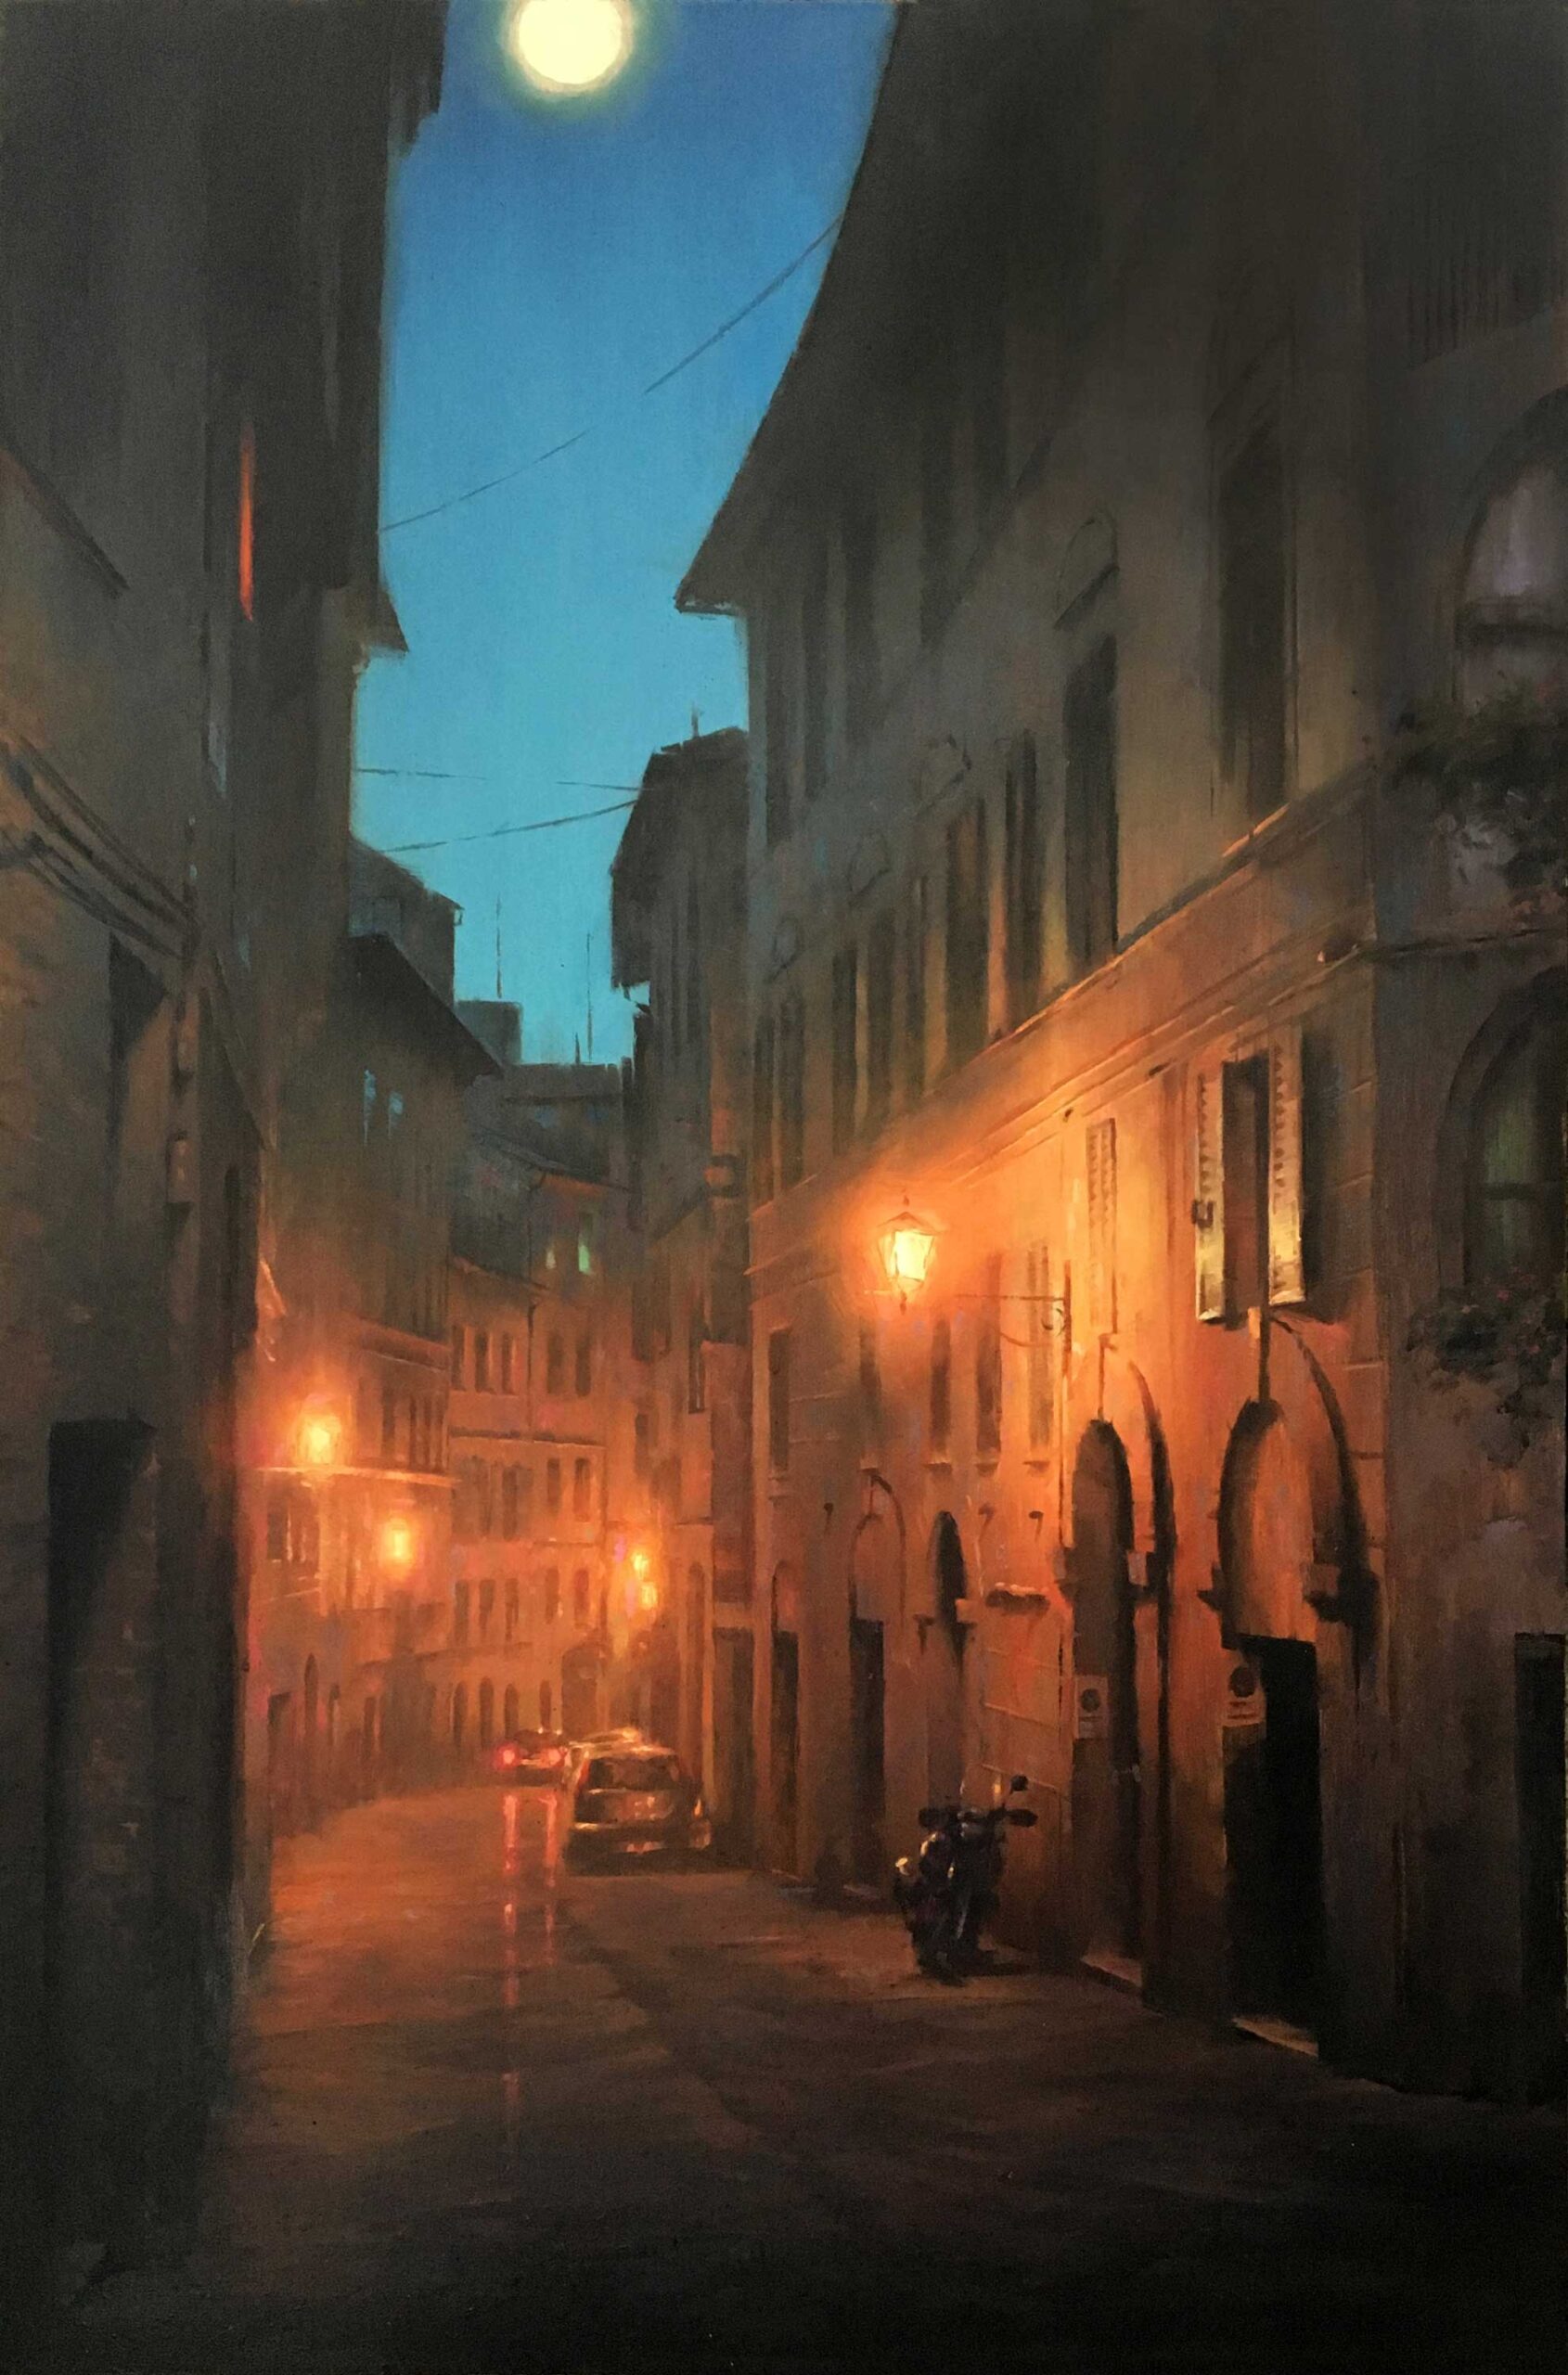 painting nocturnes - Gavin Glakas, "An Appointment in Siena," Oil on panel, 16" x 24"